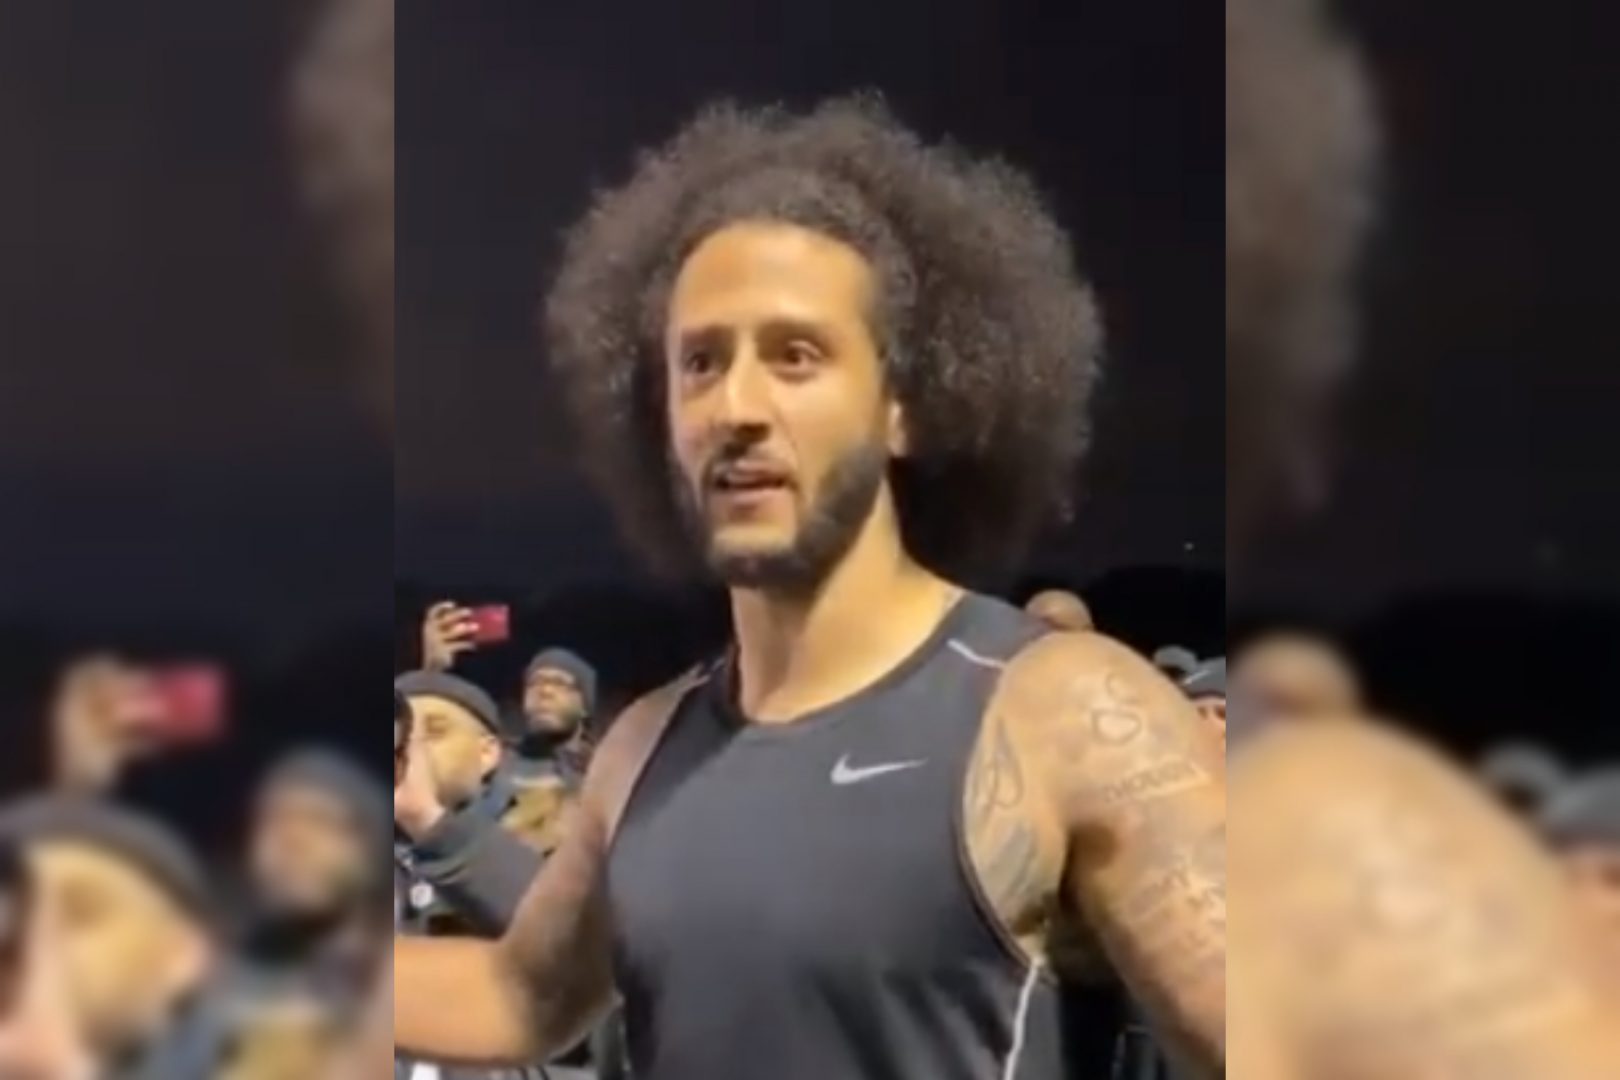 The NFL is sorry but fails to acknowledge Colin Kaepernick in apology (video)